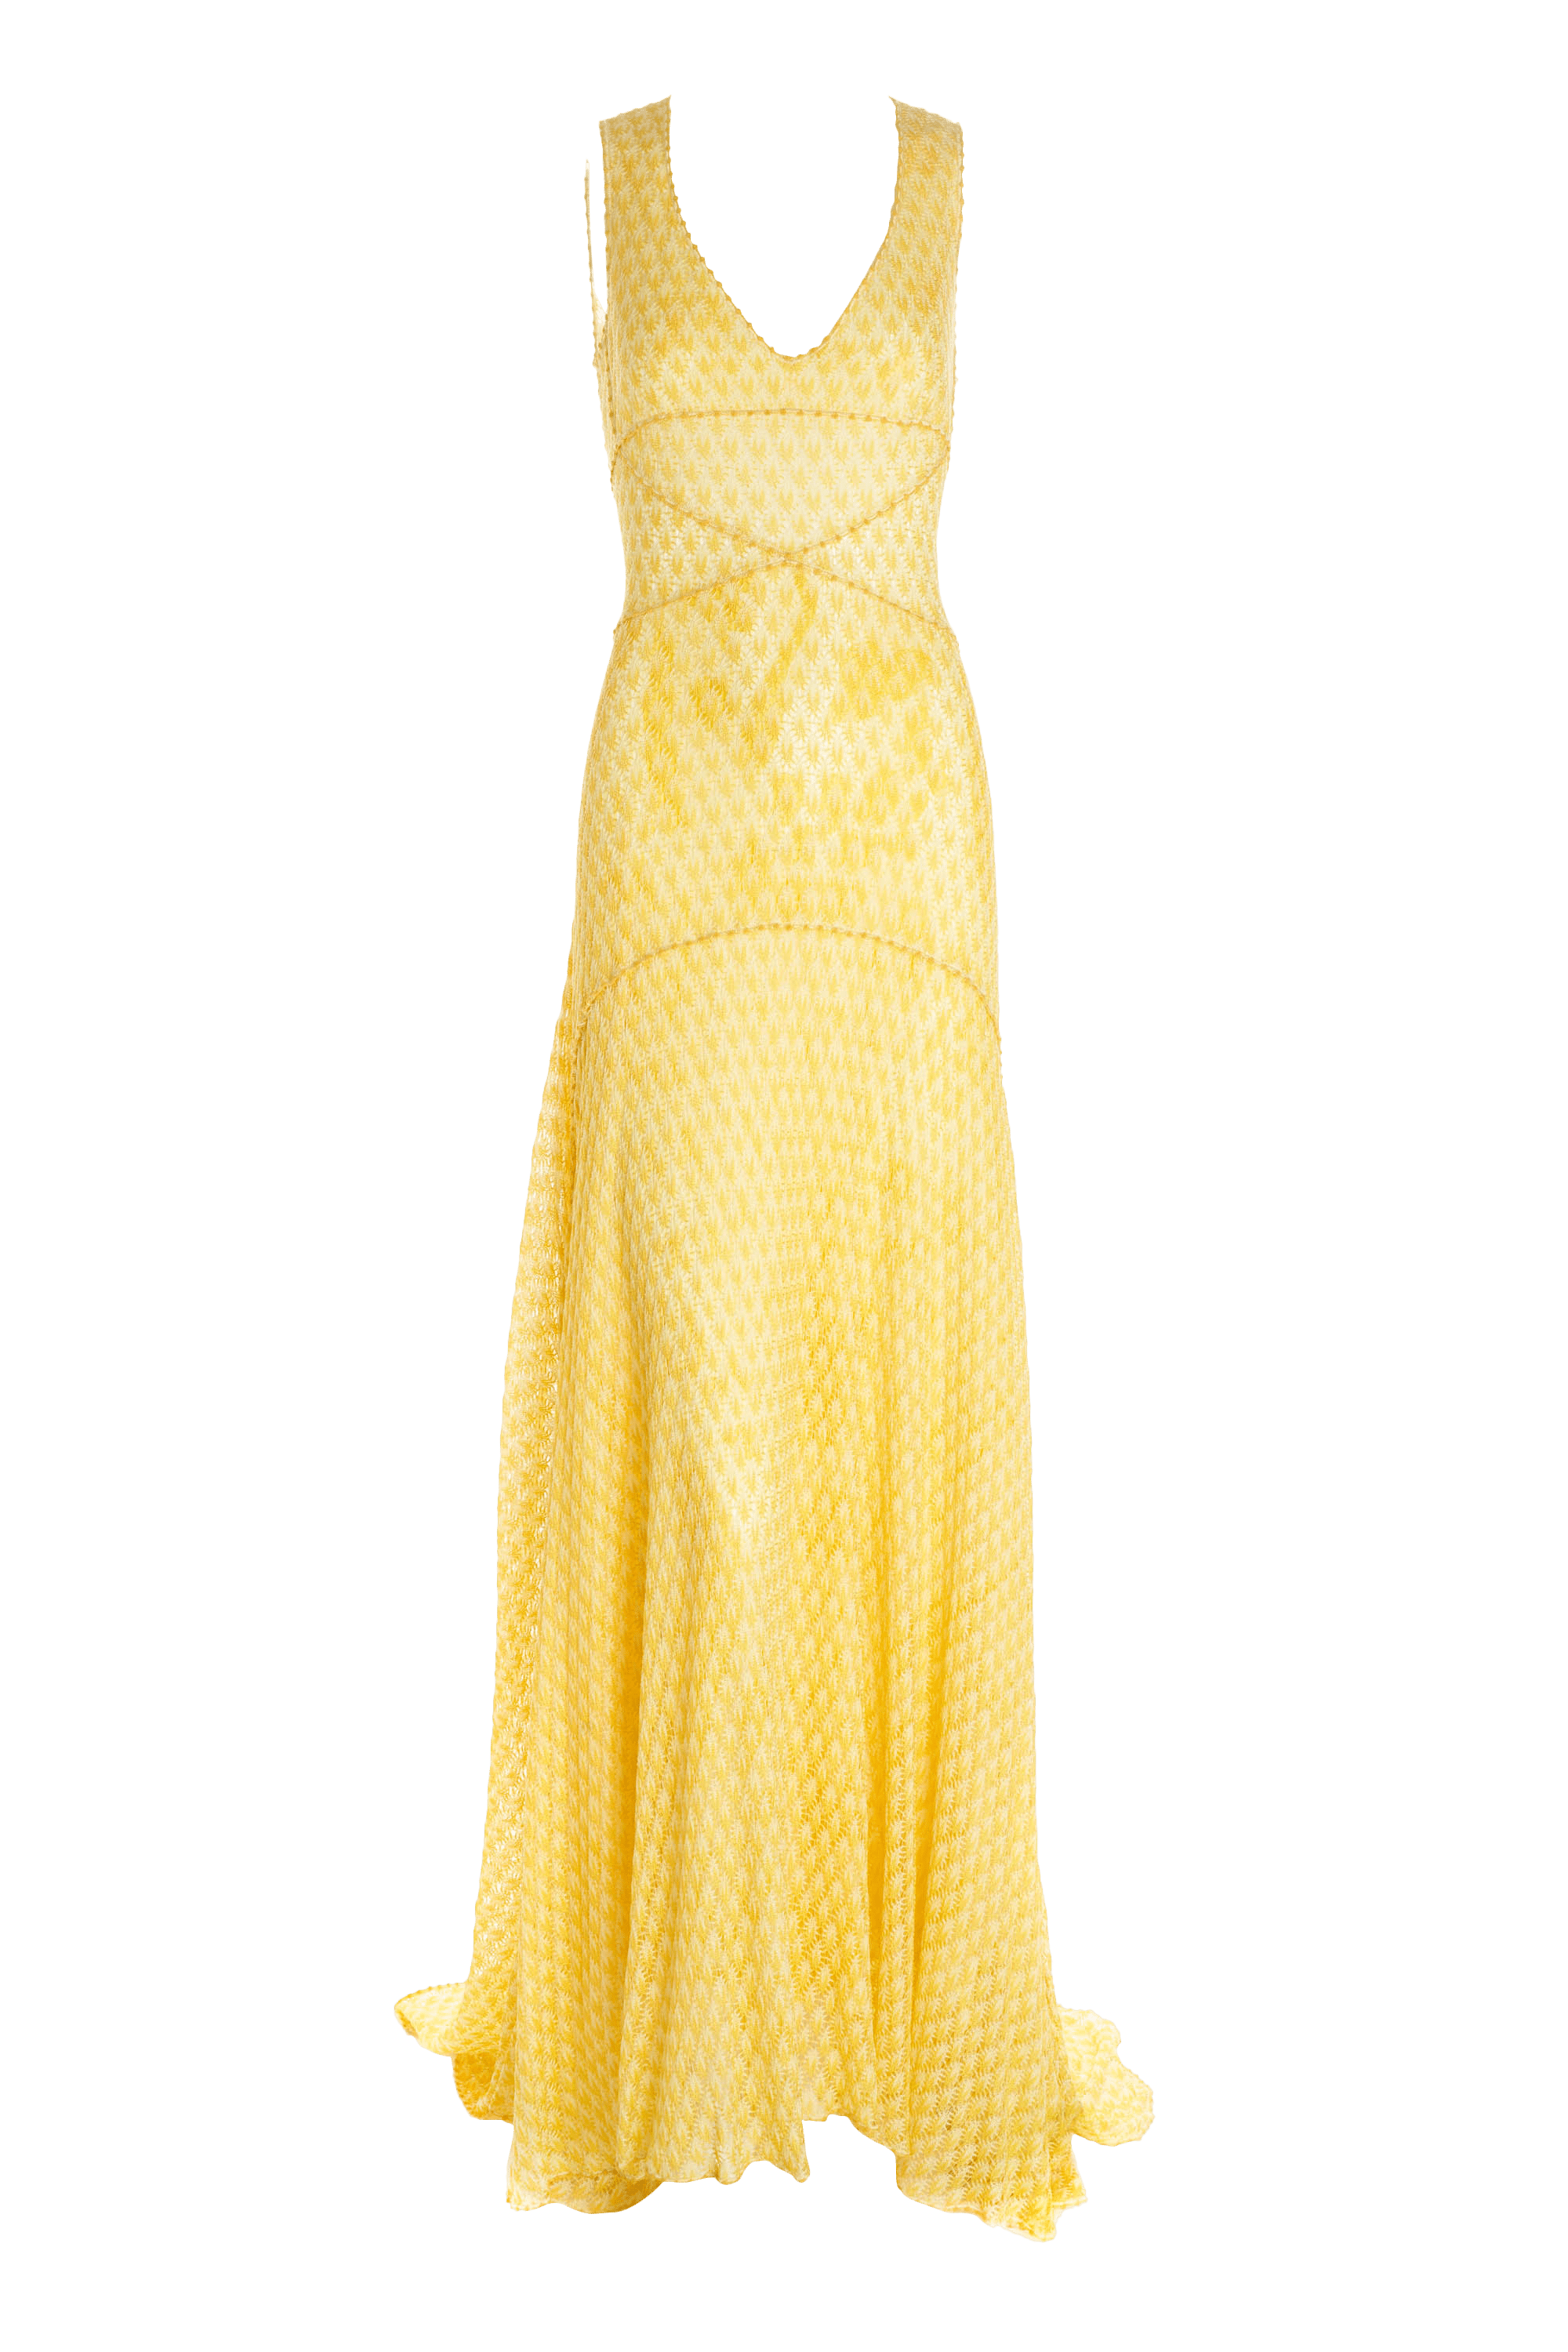 Missoni Yellow Gown Size 40